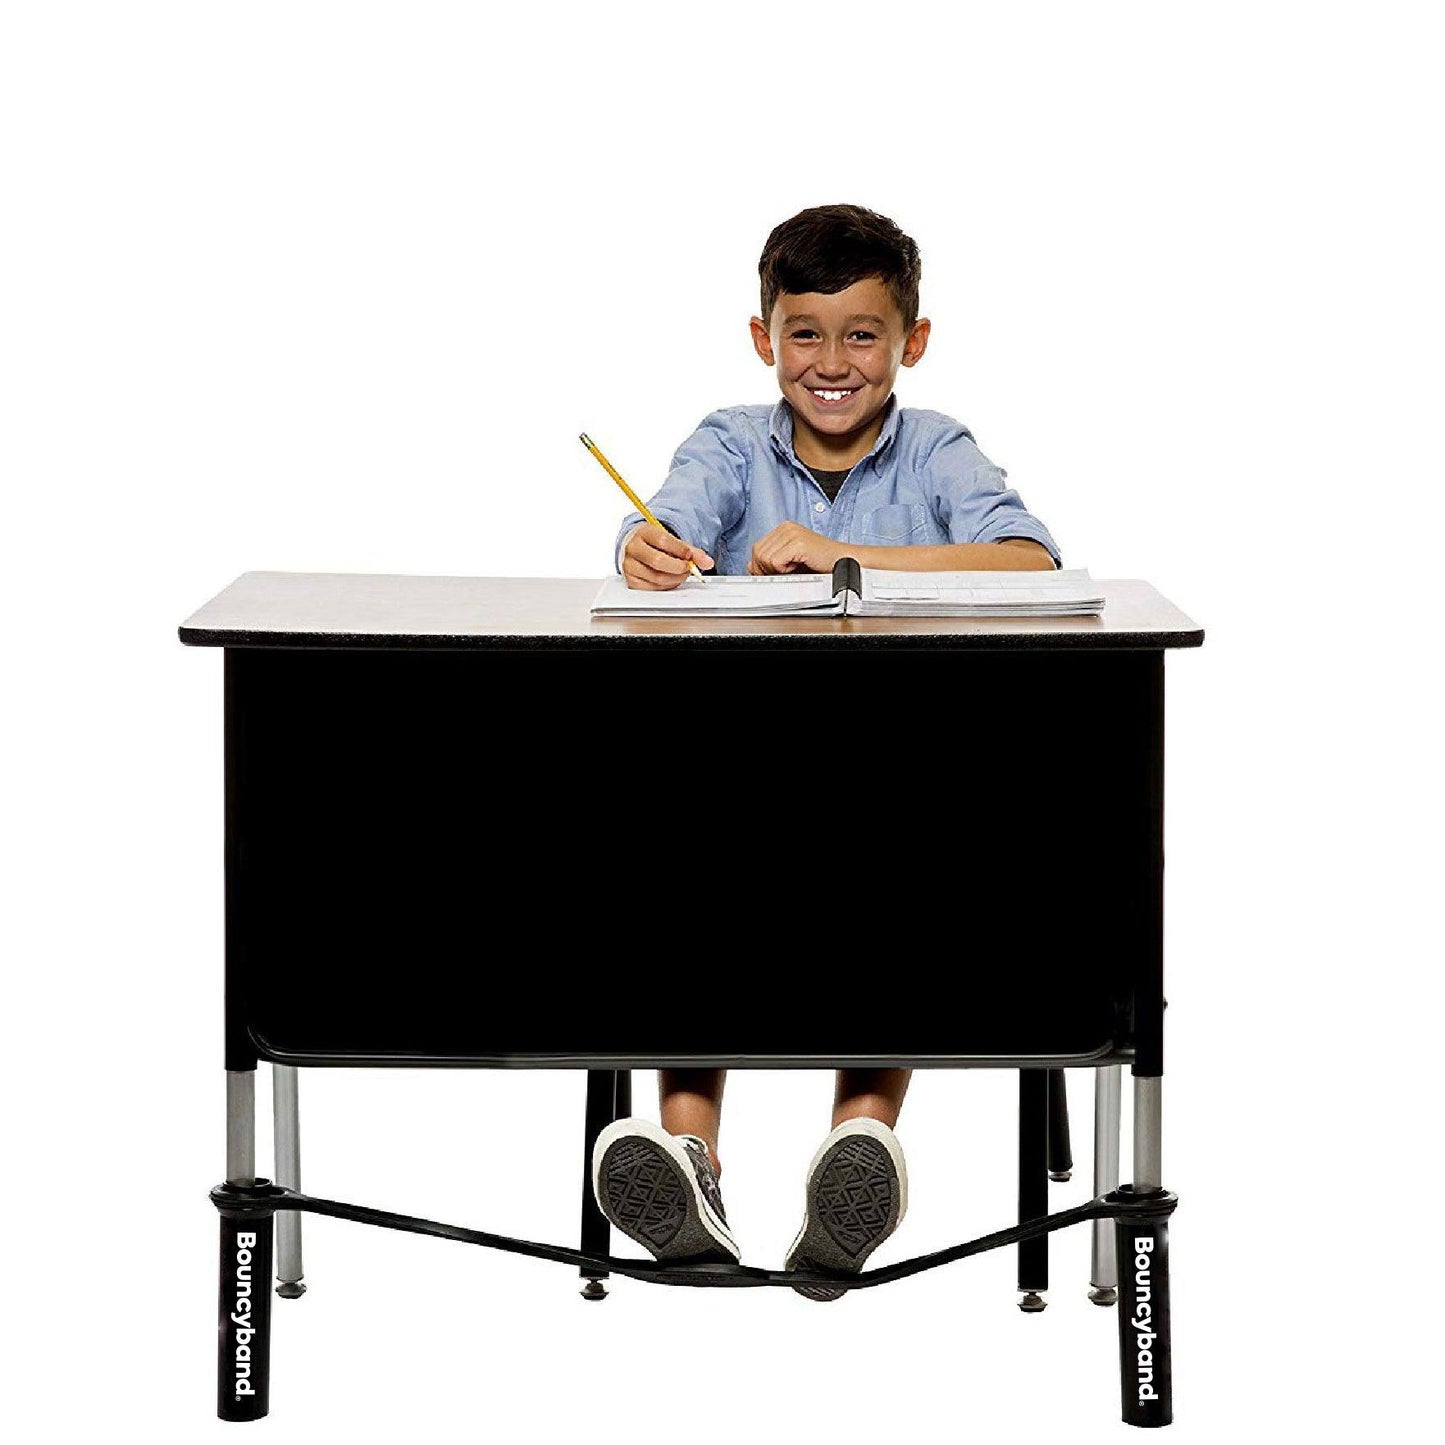 Chair Band for Extra-Wide School Desks, Black Tubes - Loomini